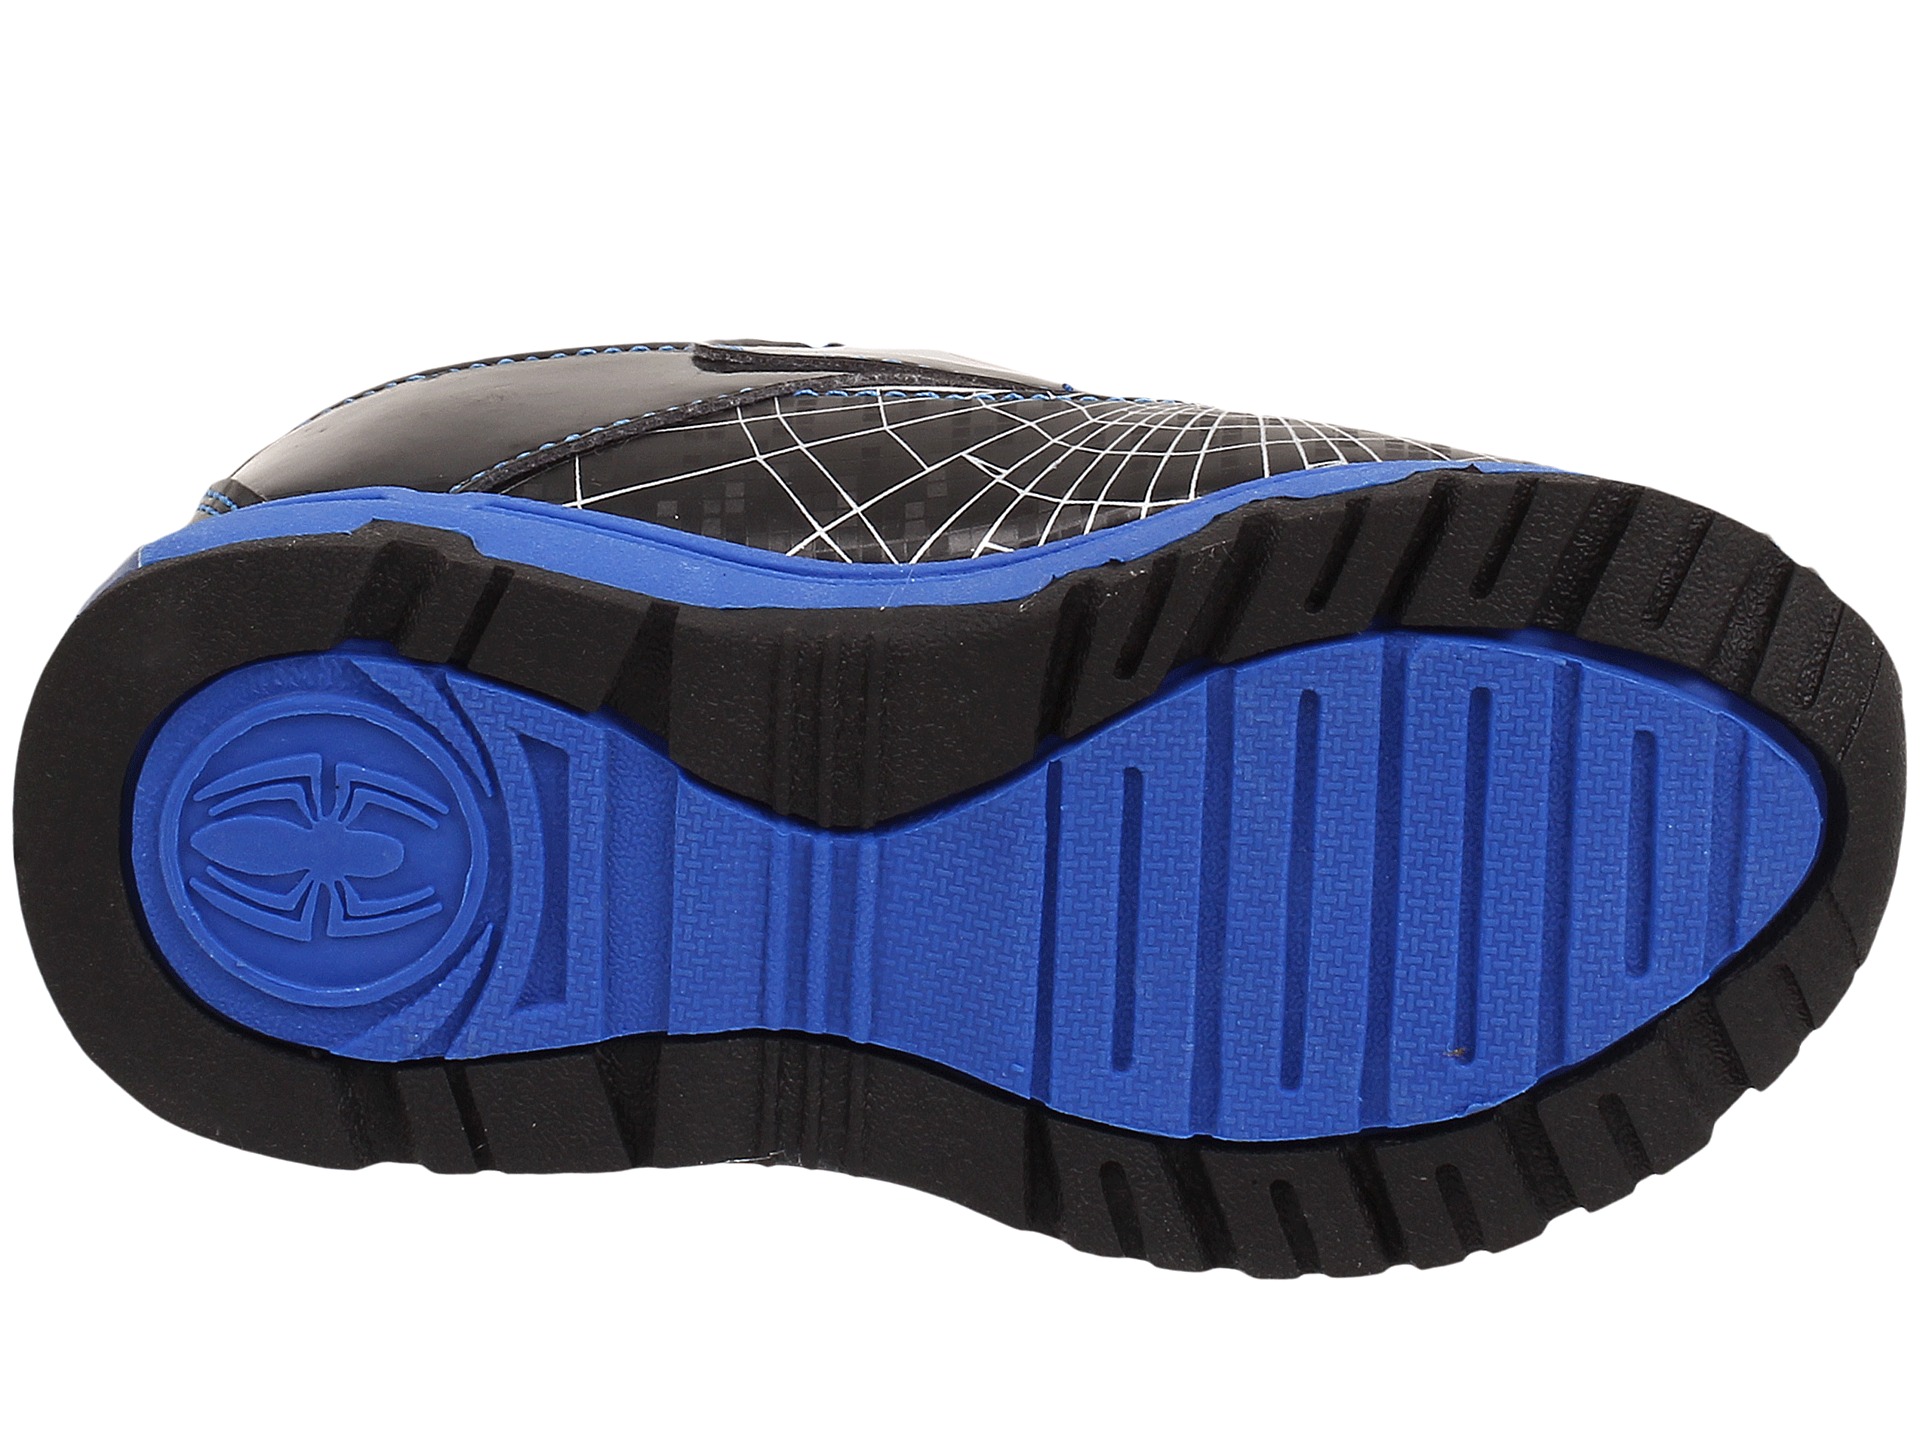 Favorite Characters Ultimate Spiderman™ Multi Lighted 1SPF350 Shoe